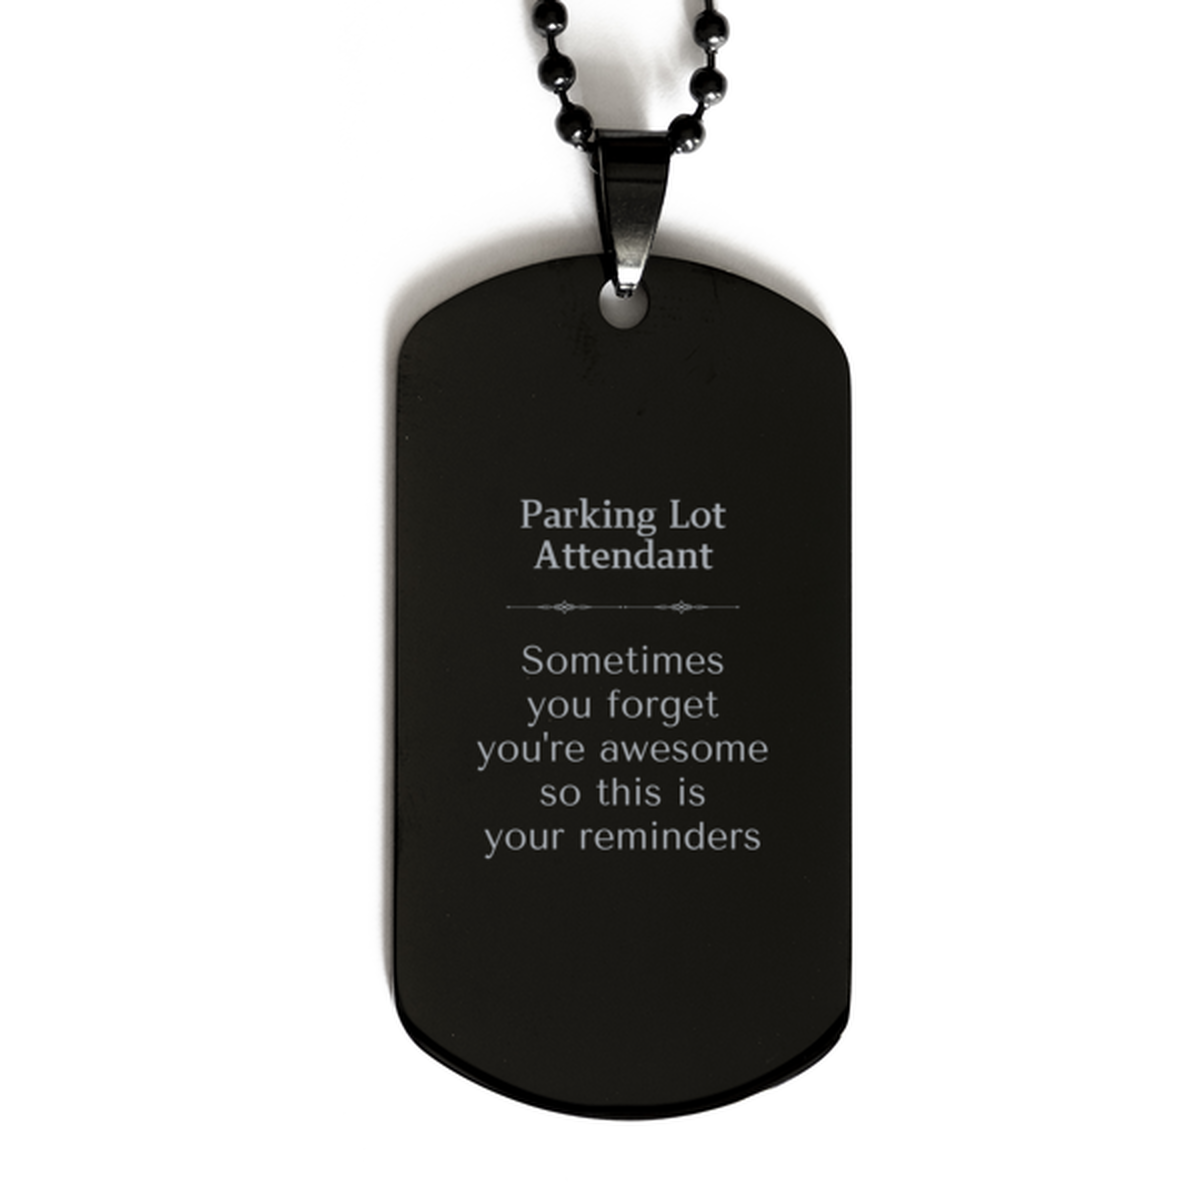 Sentimental Parking Lot Attendant Black Dog Tag, Parking Lot Attendant Sometimes you forget you're awesome so this is your reminders, Graduation Christmas Birthday Gifts for Parking Lot Attendant, Men, Women, Coworkers